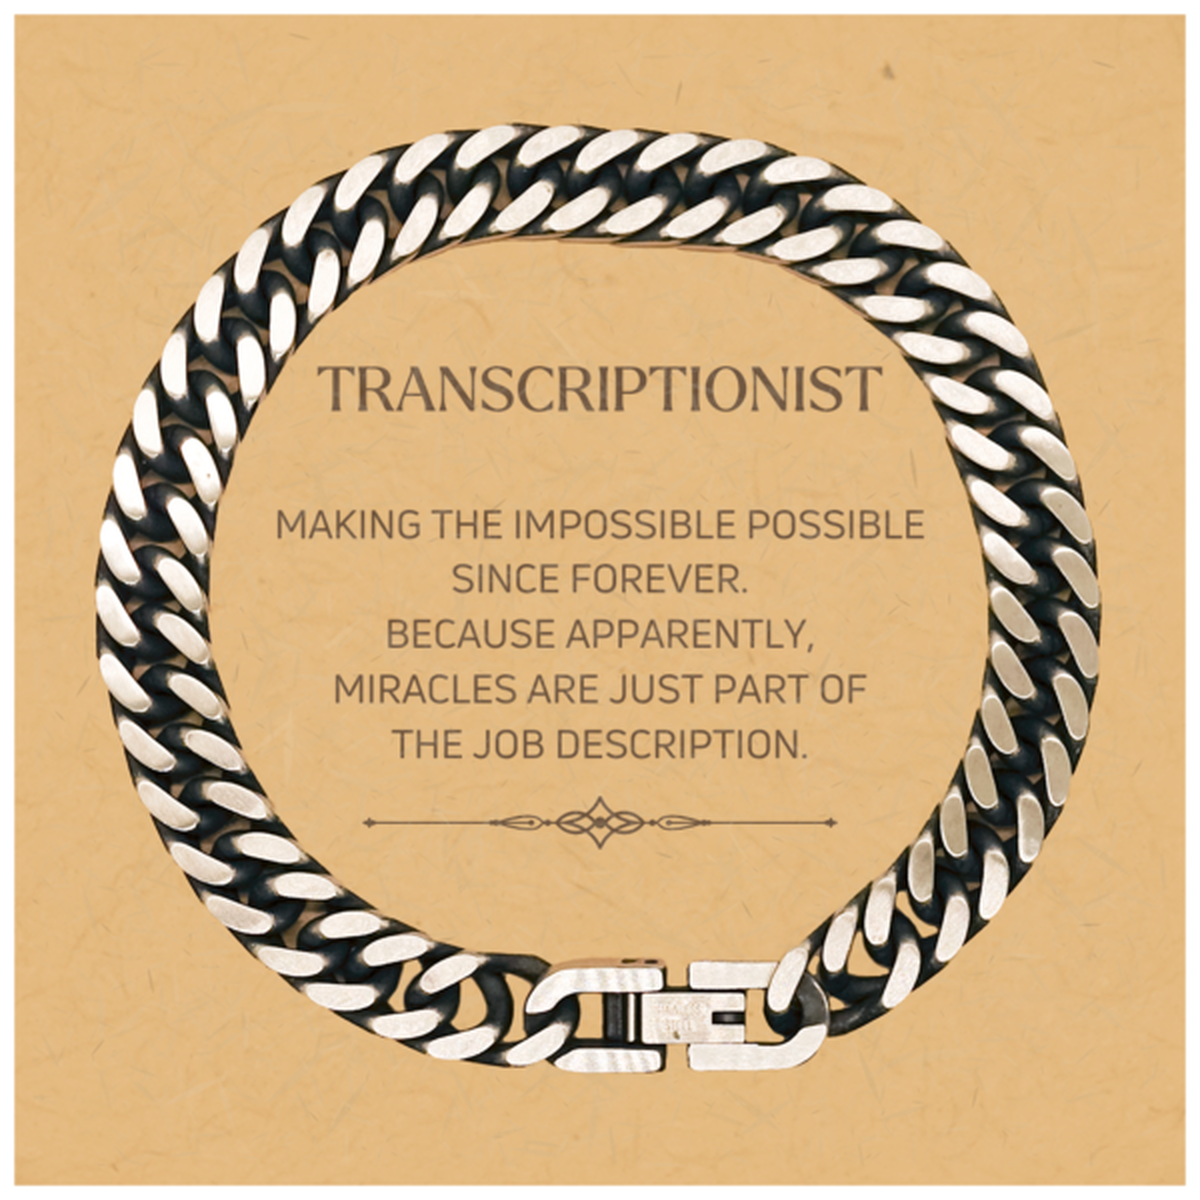 Funny Transcriptionist Gifts, Miracles are just part of the job description, Inspirational Birthday Christmas Cuban Link Chain Bracelet For Transcriptionist, Men, Women, Coworkers, Friends, Boss